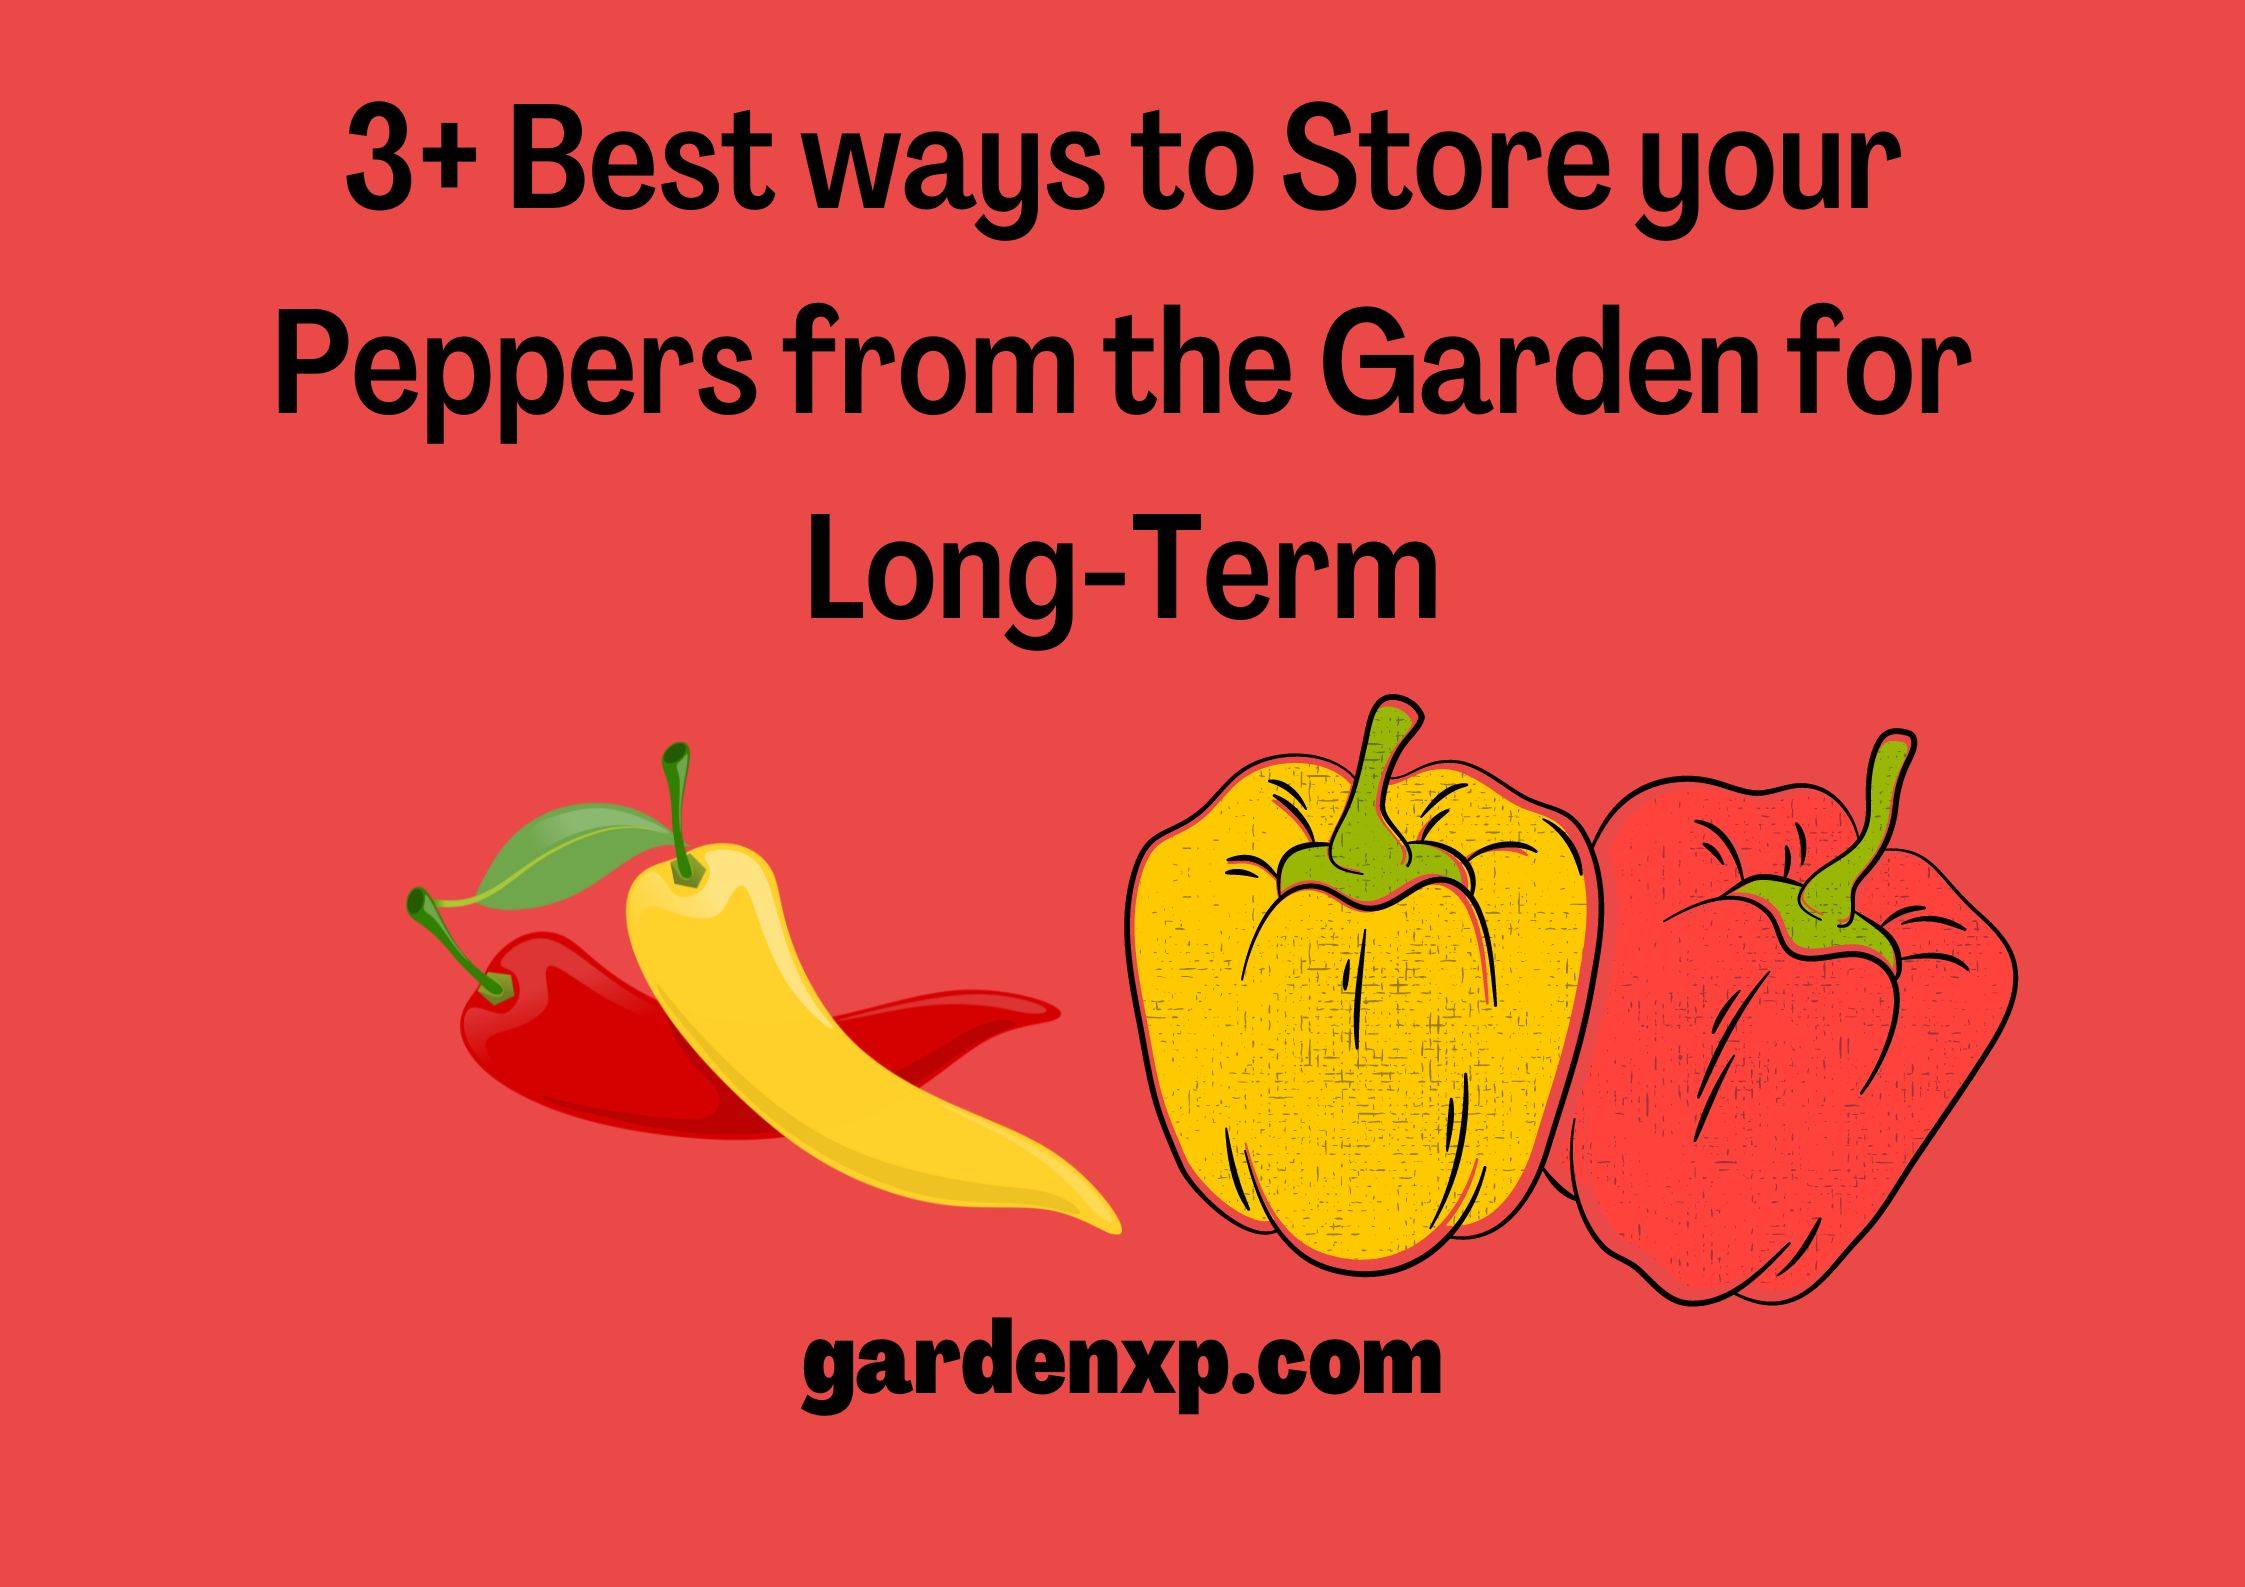 3+ Best ways to Store your Peppers from the Garden for Long-Term